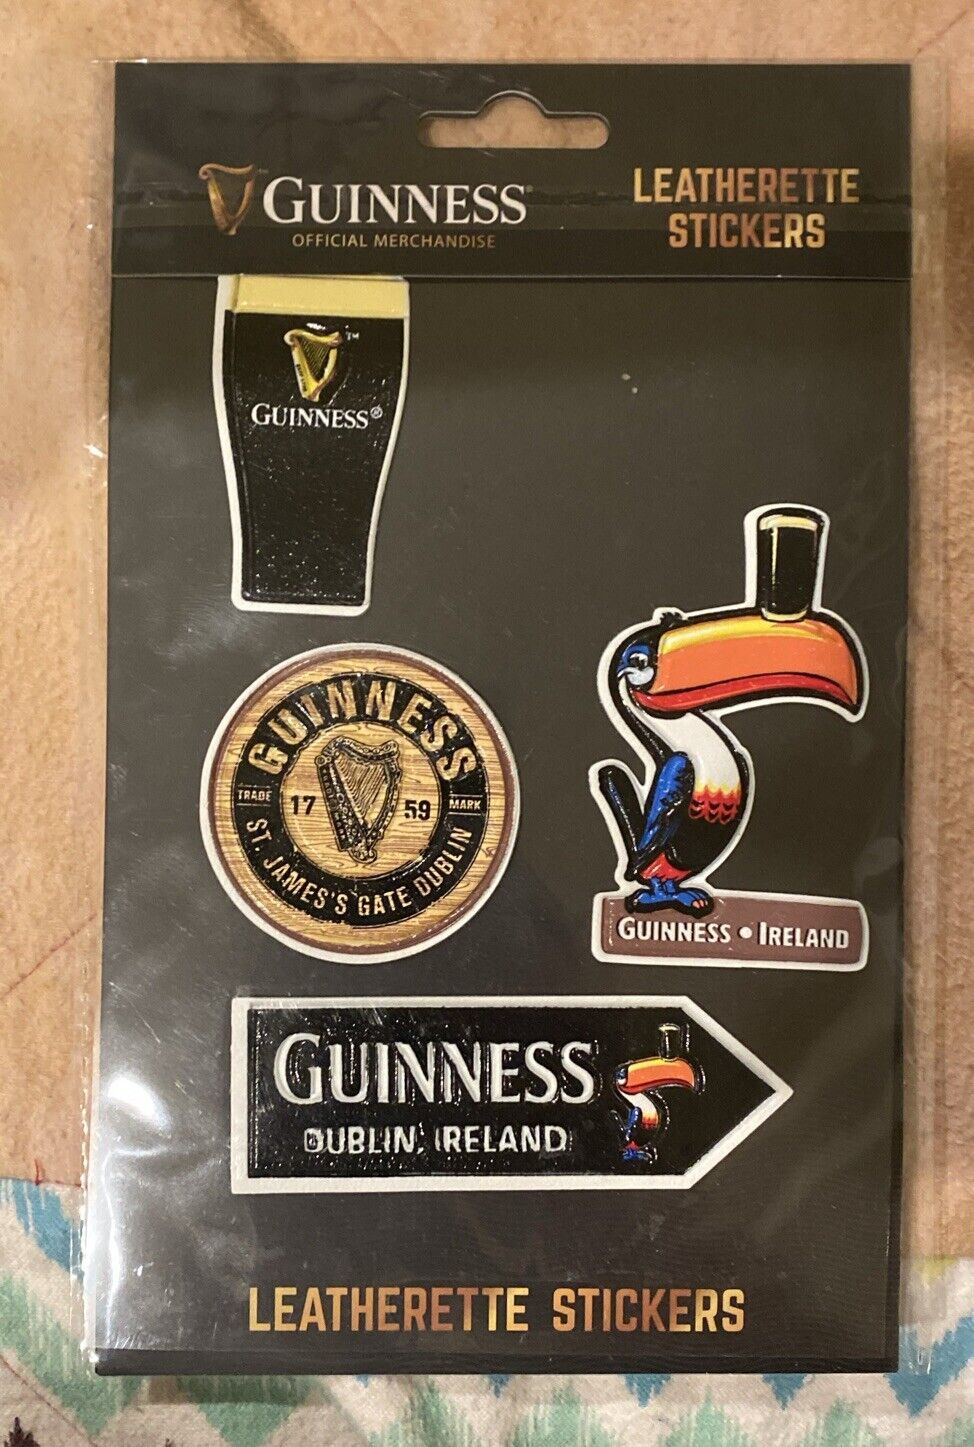 Guinness Leatherette Stickers - Official Series from Dublin, Ireland